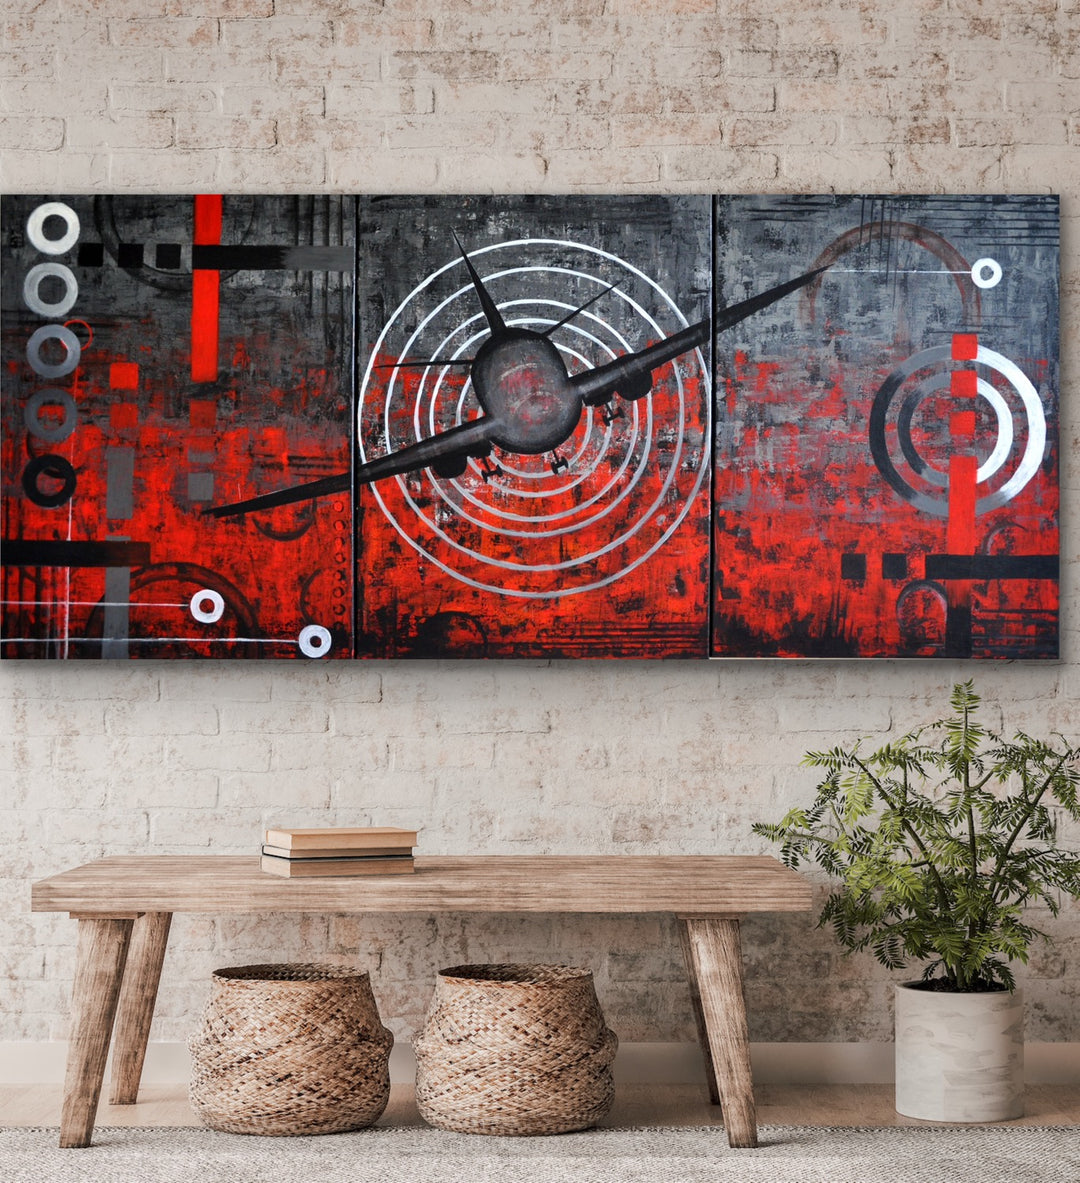 Heads up display - Custom Art - Abstract painting, Minimalist Art, Framed painting, Wall Art, Wall Decor, Large painting, Local Artist